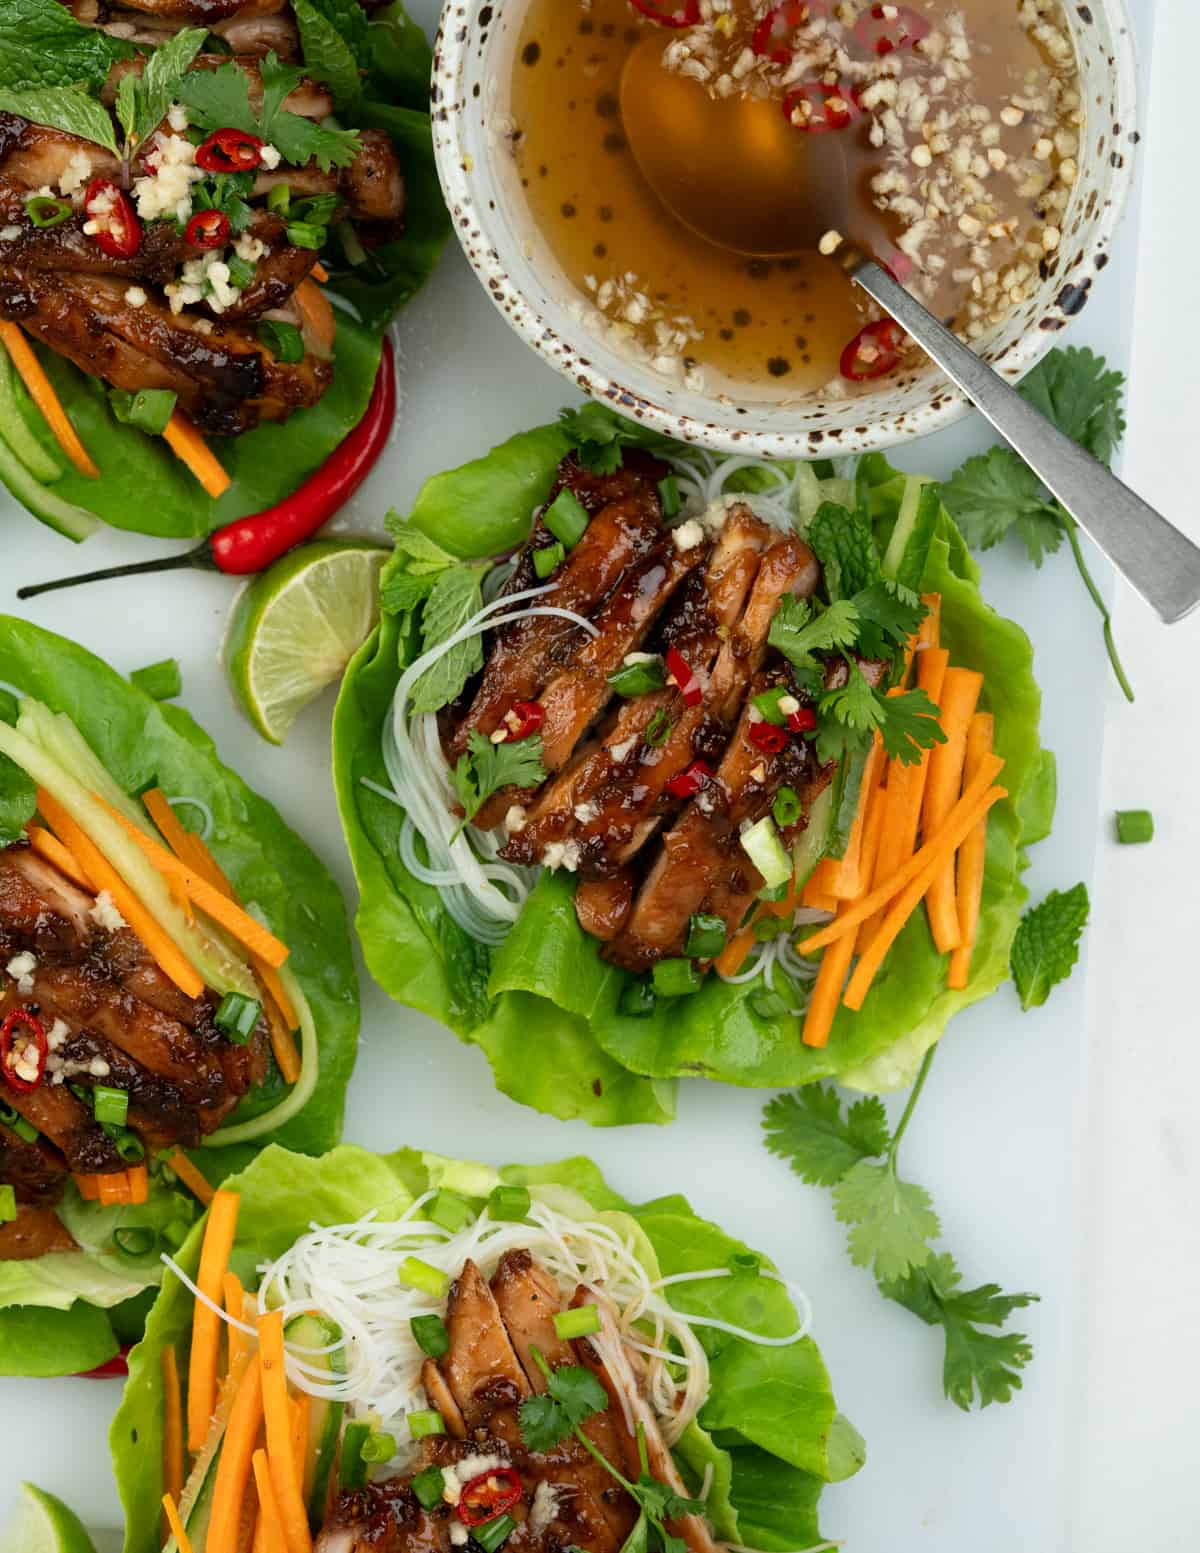 ender lettuce leaves are topped with sweet sticky chicken, crunchy veggies, rice vermicelli, and fresh herbs and dressed with Nuoc Cham a salty, sweet, and spicy Vietnamese dipping sauce.